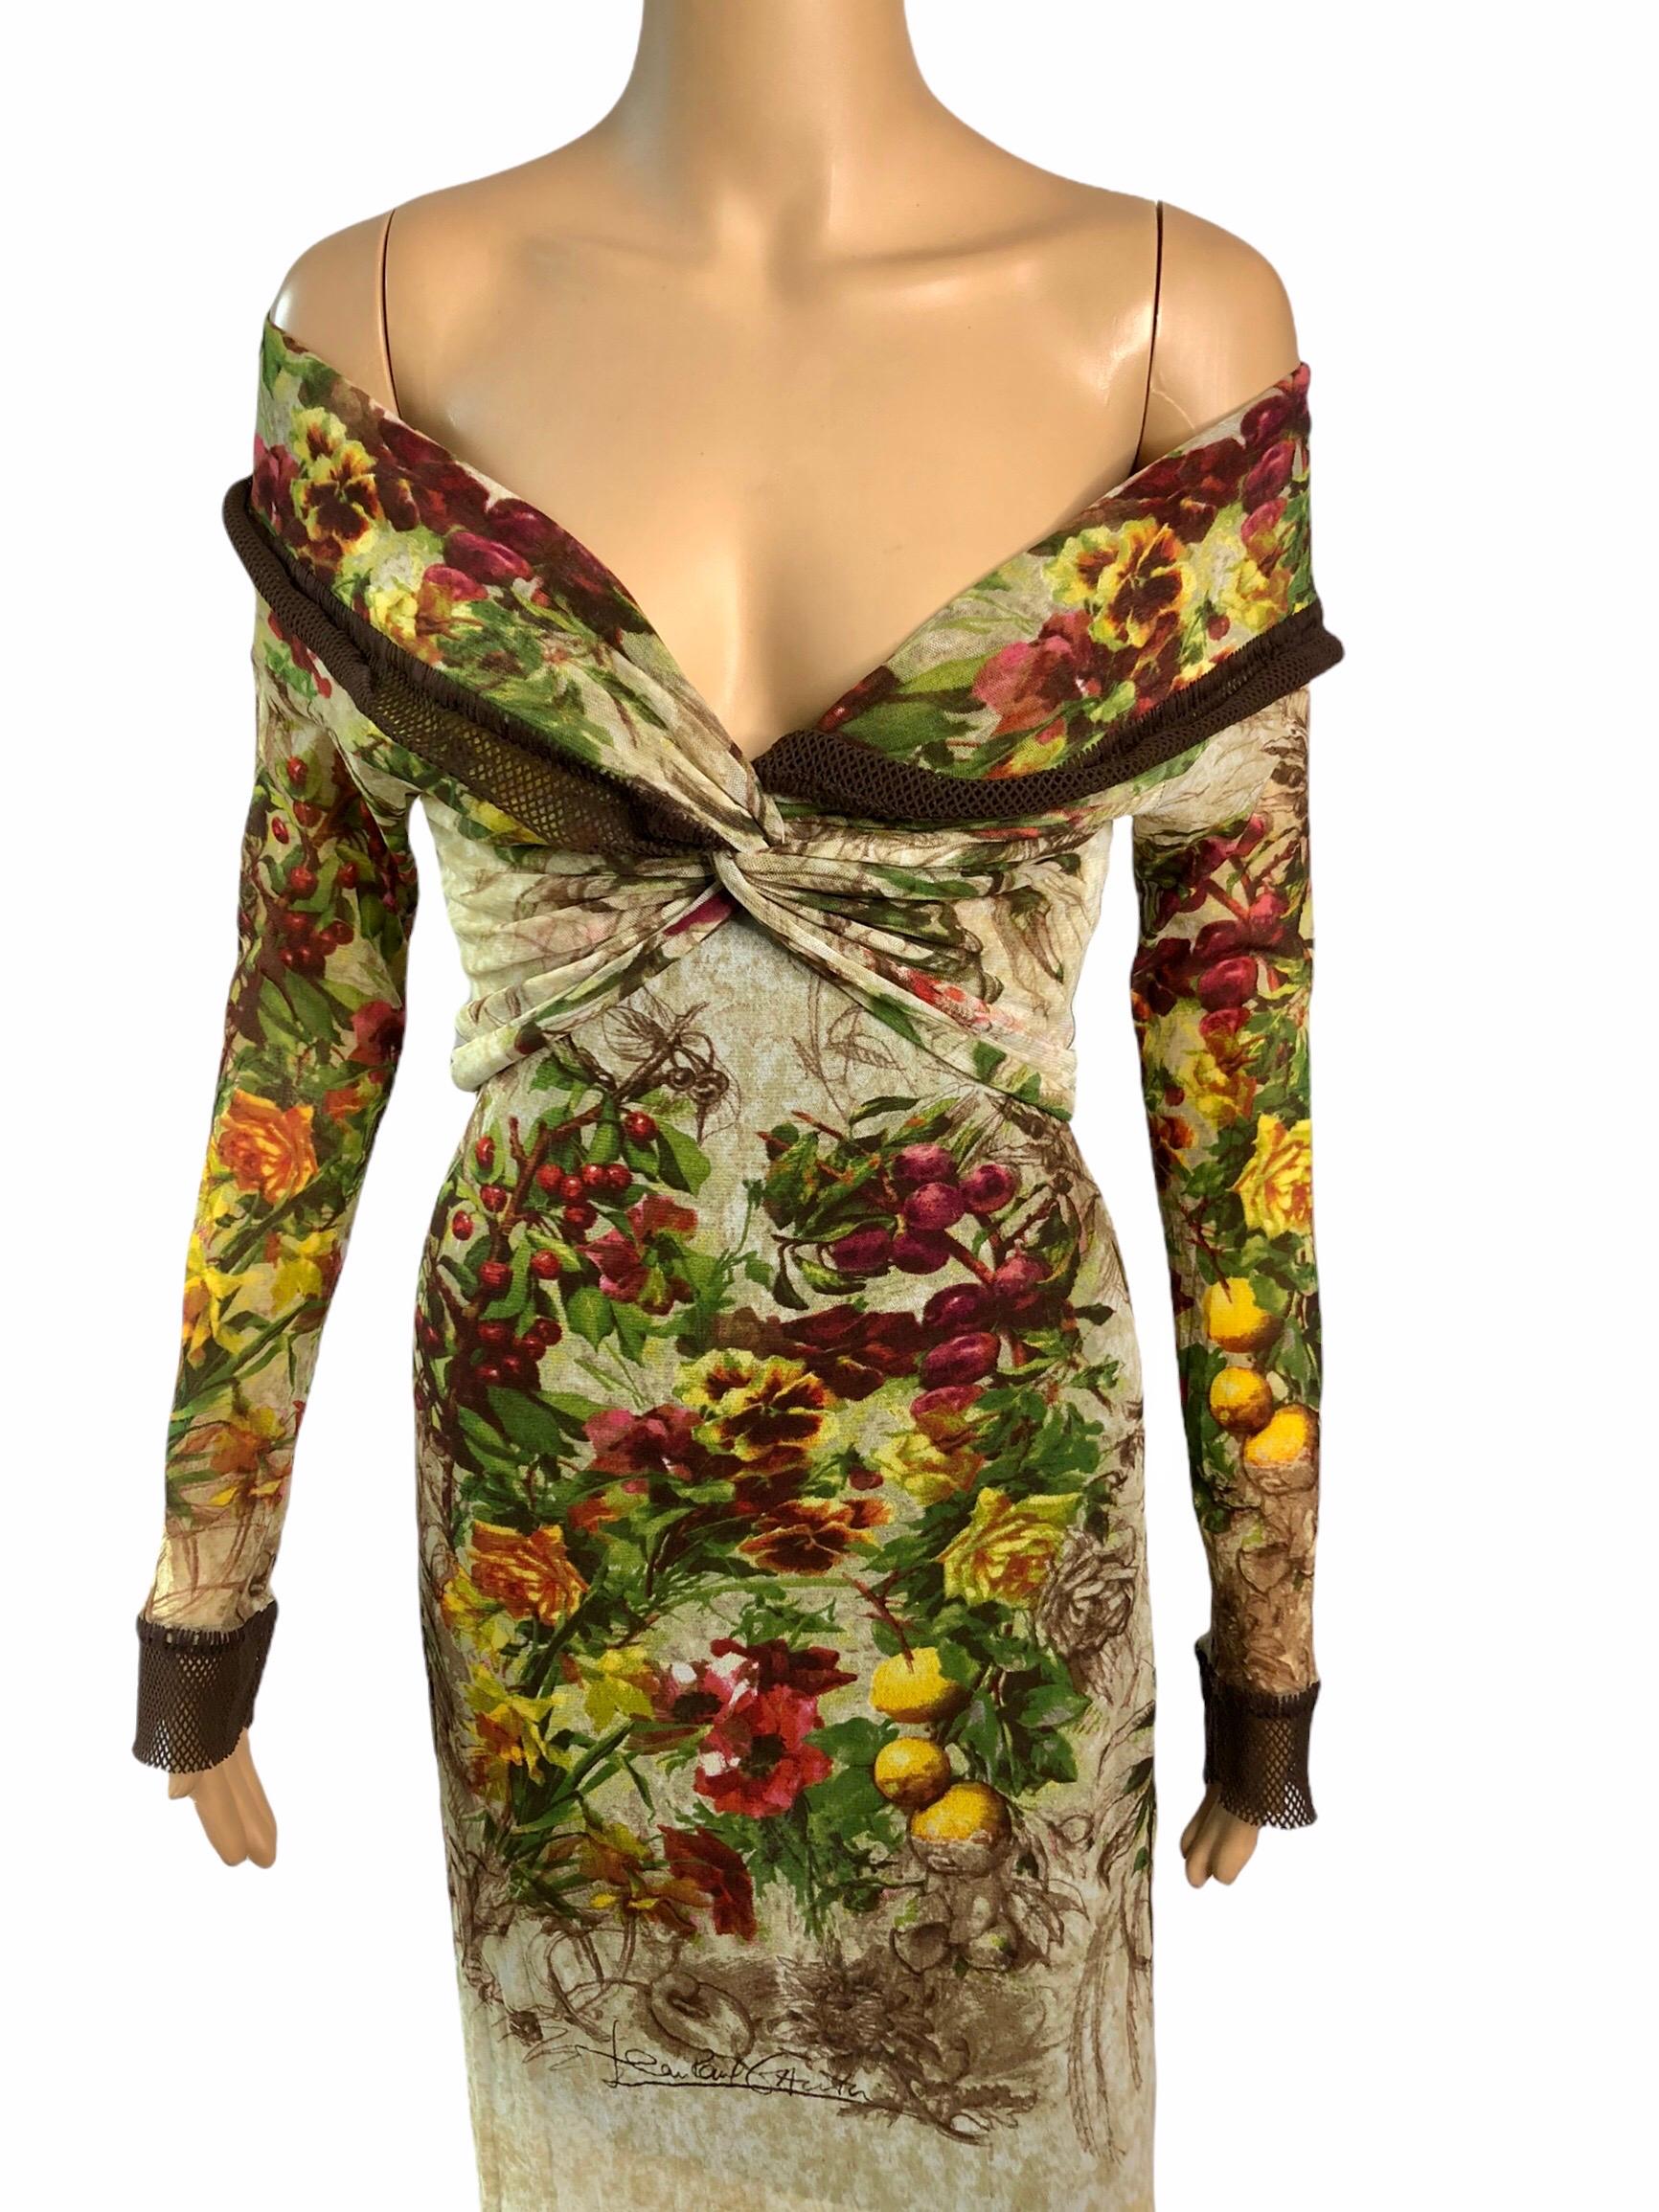 Jean Paul Gaultier Classique S/S 1999 Runway Vintage Floral Semi-Sheer Off Shoulder Dress

Please note size tag is missing. Due to stretch this dress will fit size XS-M.